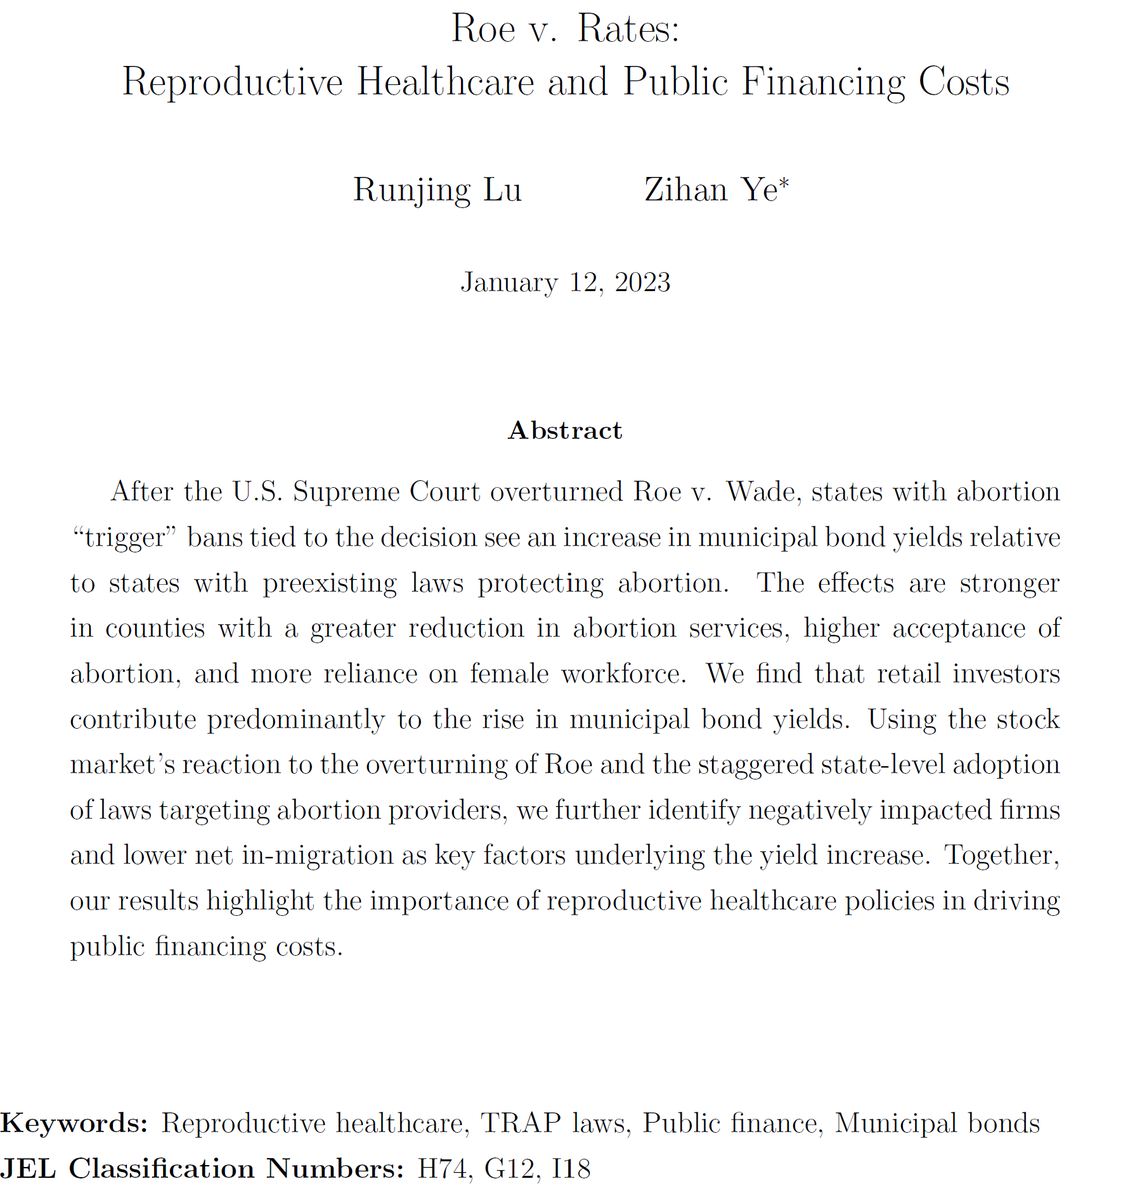 We will have a new Virtual Municipal Finance Workshop today at 11am ET! Zihan Ye of University of Tennessee will present 'Roe v. Rates: Reproductive Healthcare and Public Financing Costs' (joint with Runjing Lu of University of Alberta) Paper + Info: muni-workshop.com